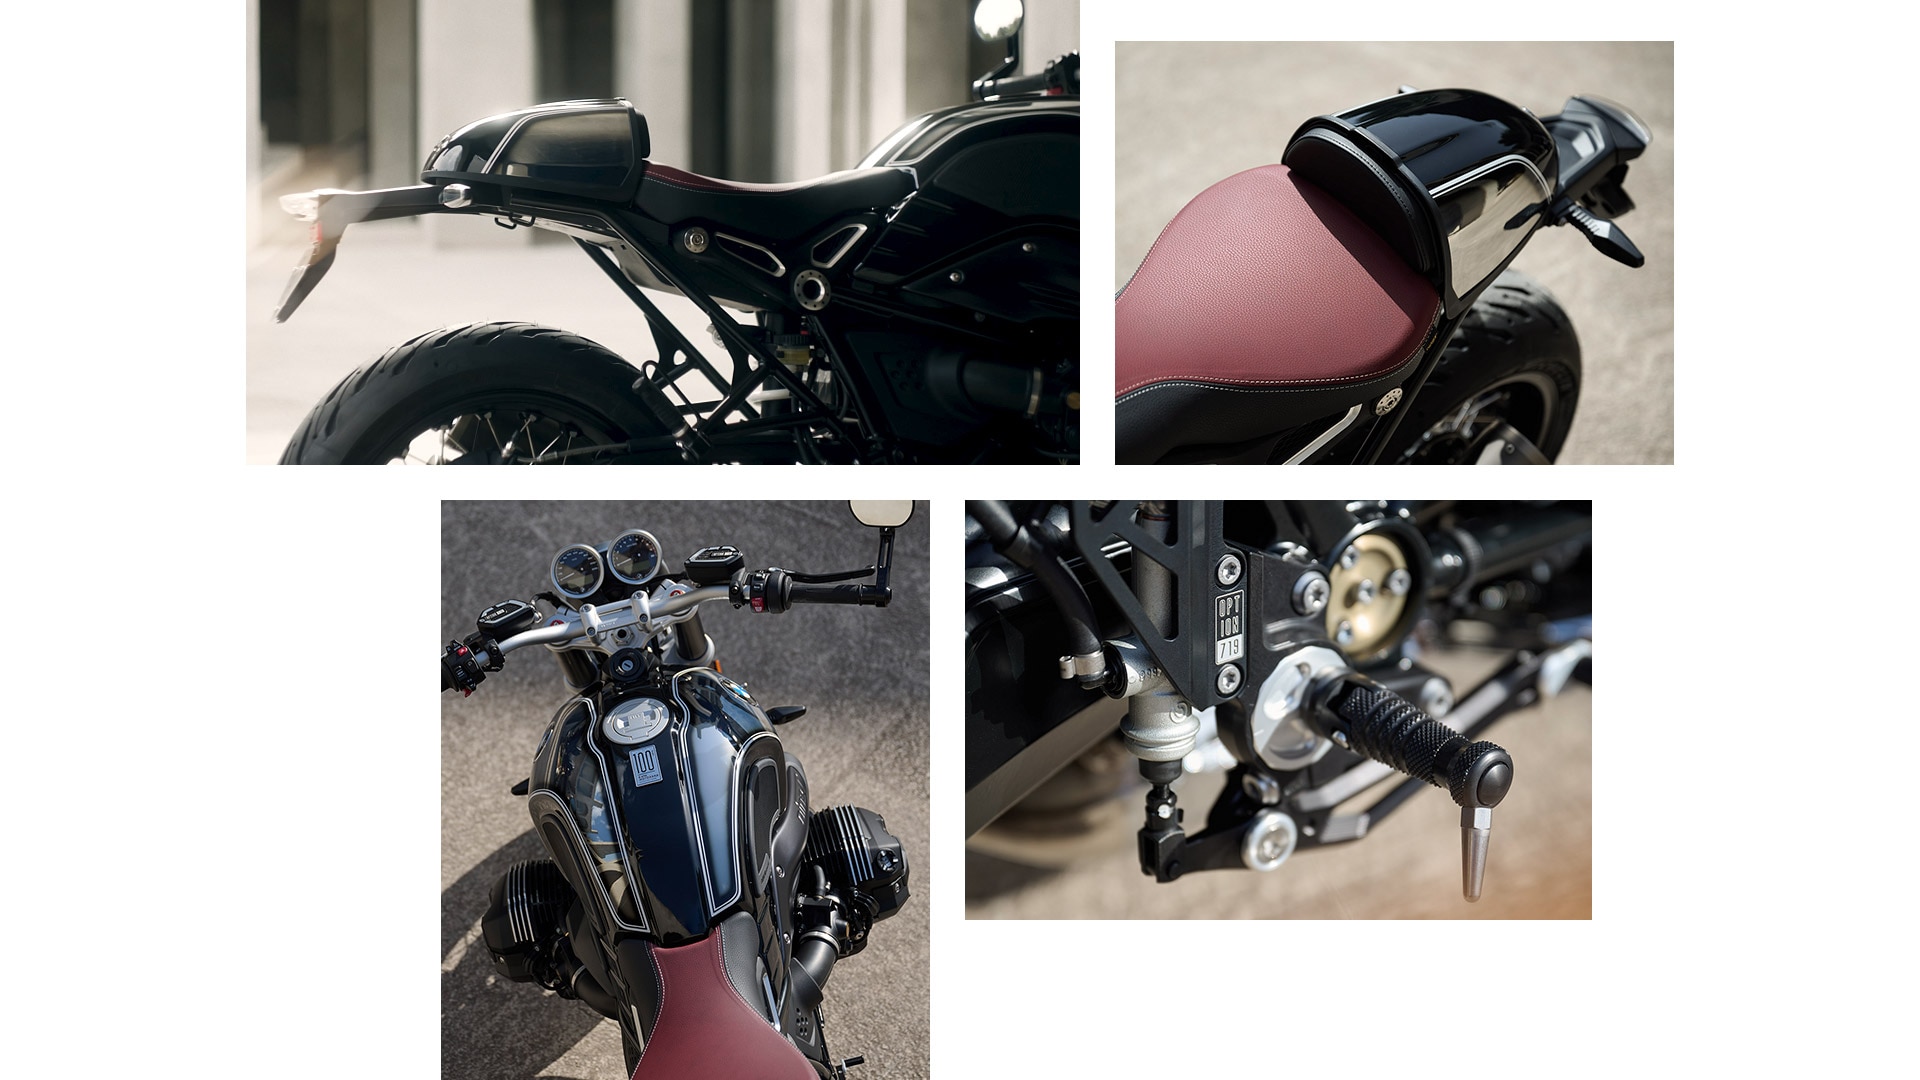 Gallery with images and videos of the BMW Motorrad R nineT 100 Years.